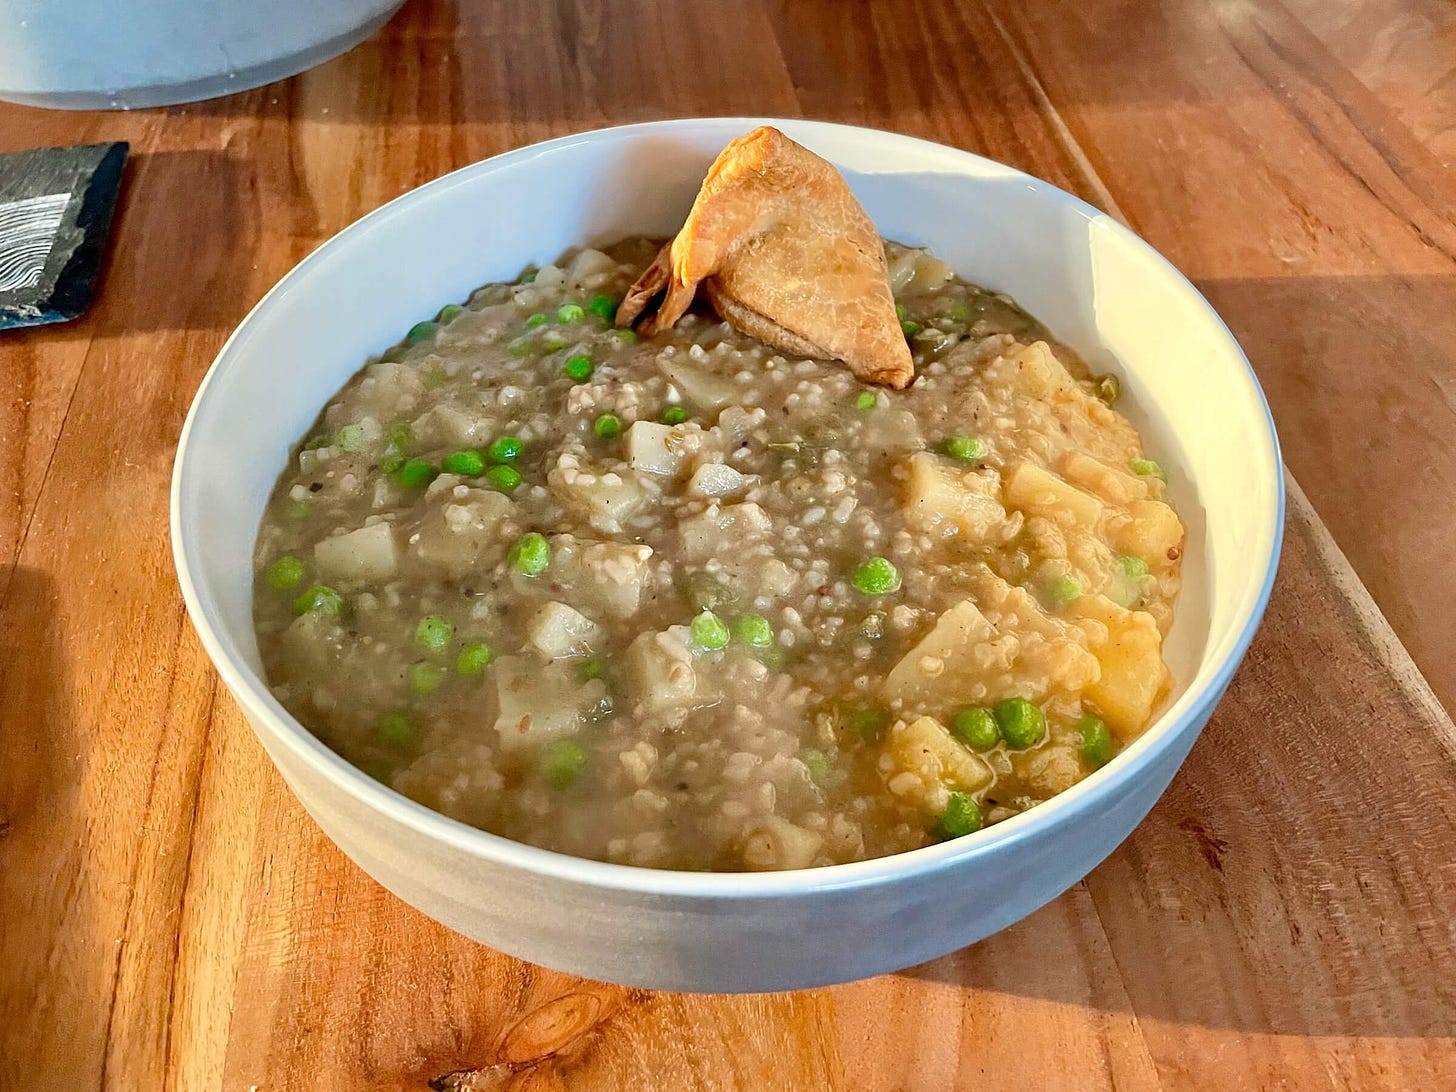 A grey bowl of risotto with potatoes and peas, and a samosa perched at the far side.